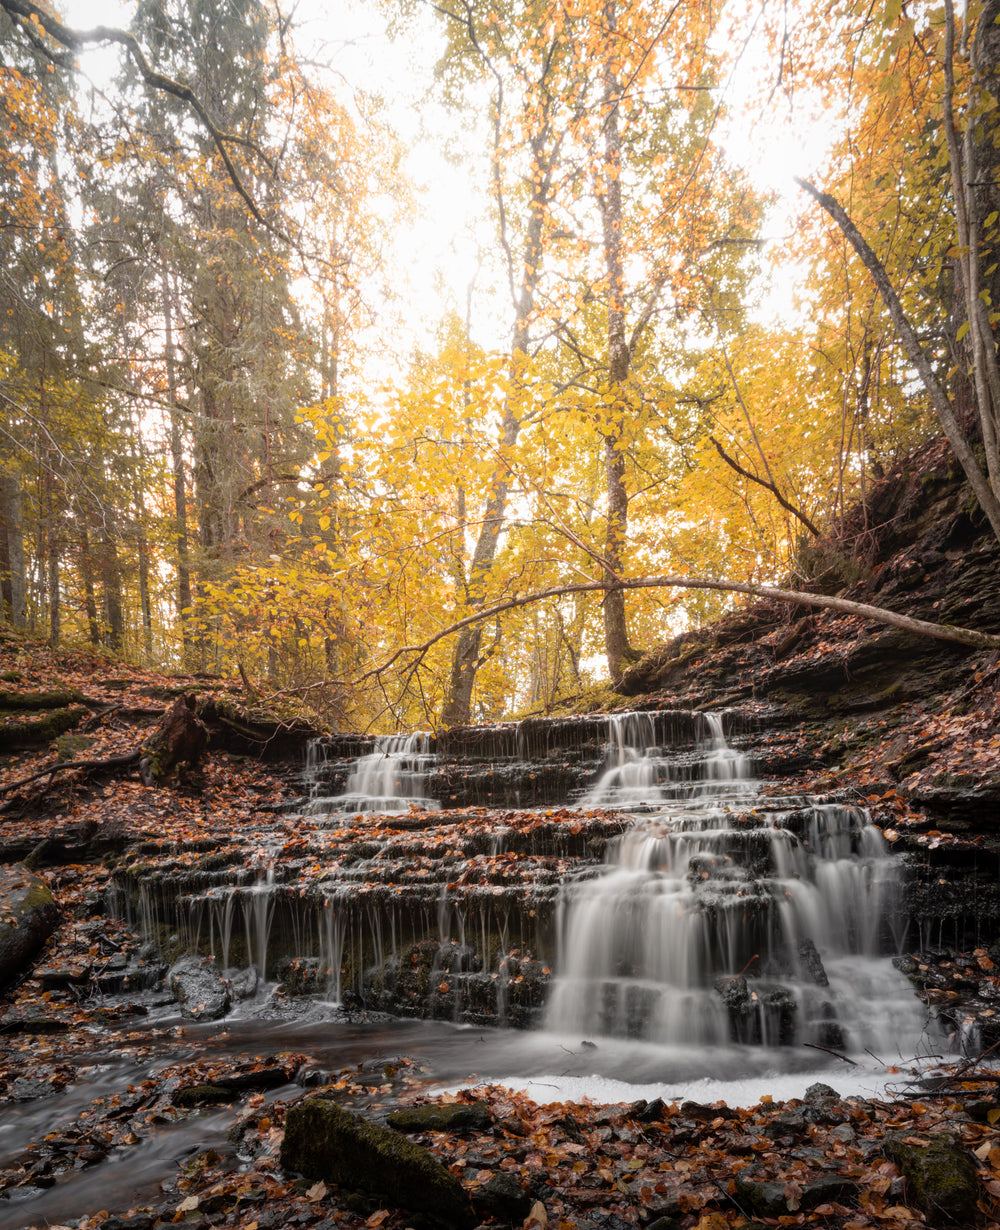 yellow autumn trees and a trickling waterfall